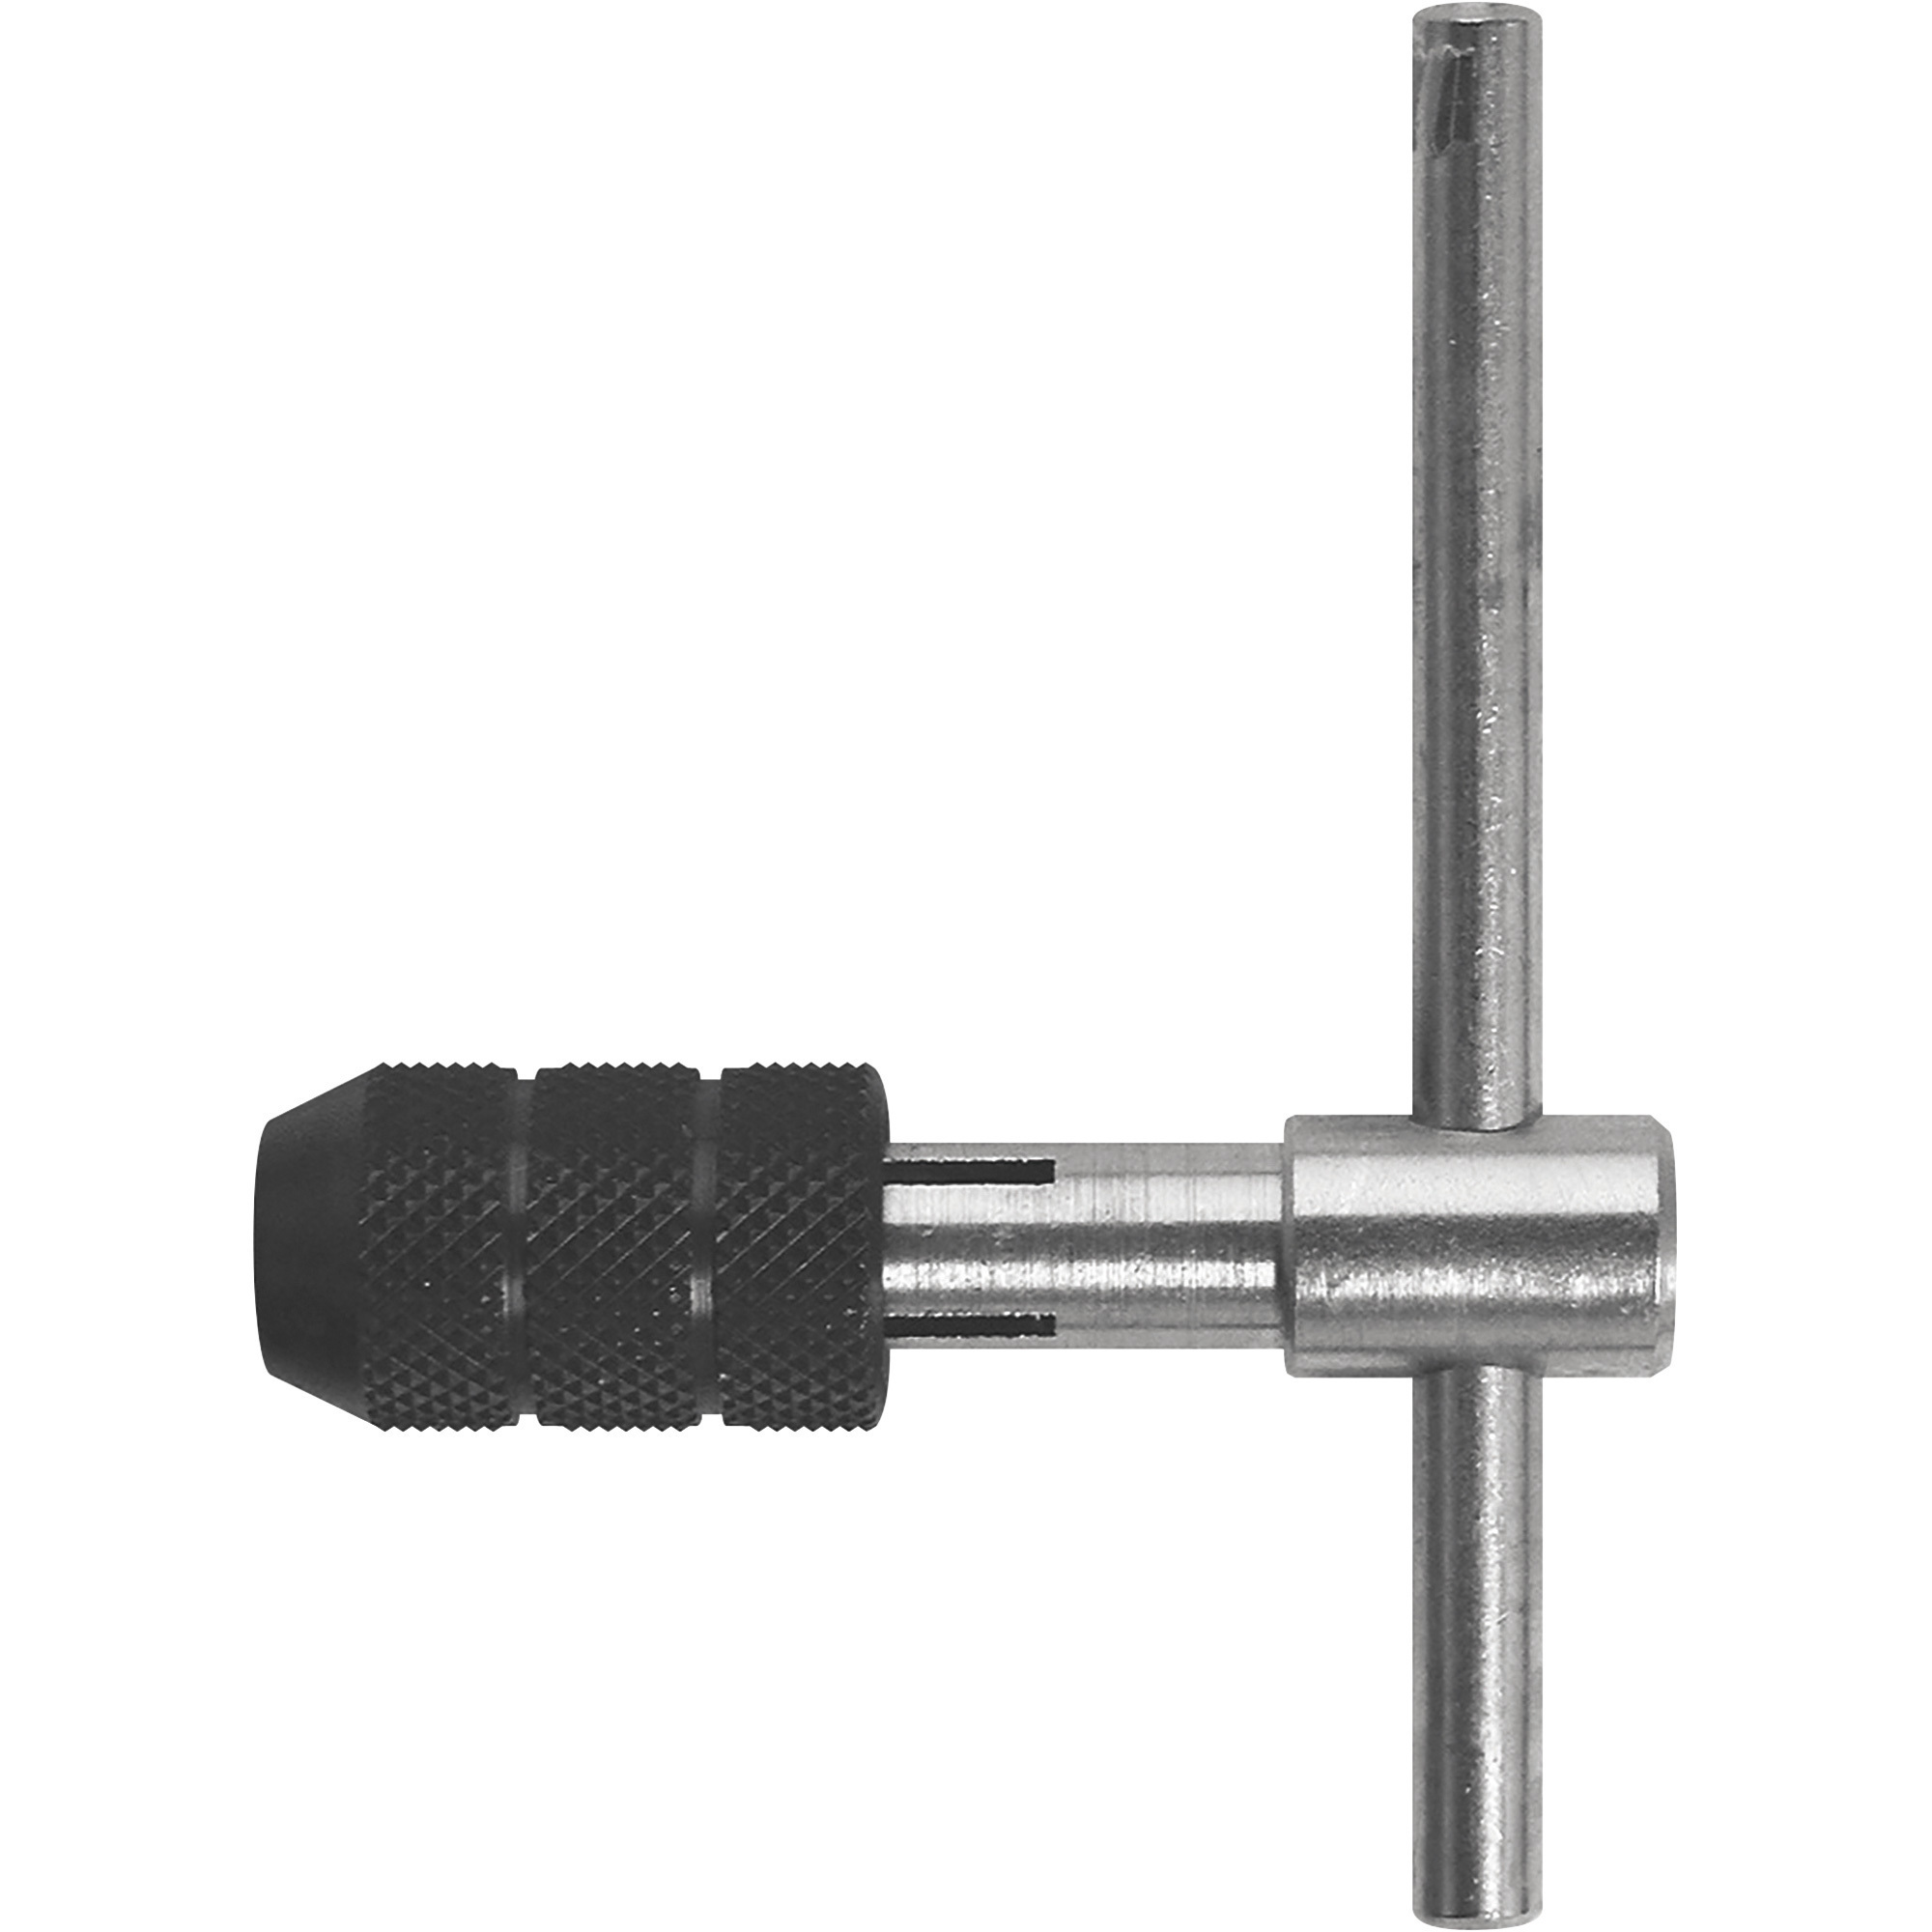 Century Drill & Tool T-Handle Tap Wrench, 0-1/4Inch, Model 98501